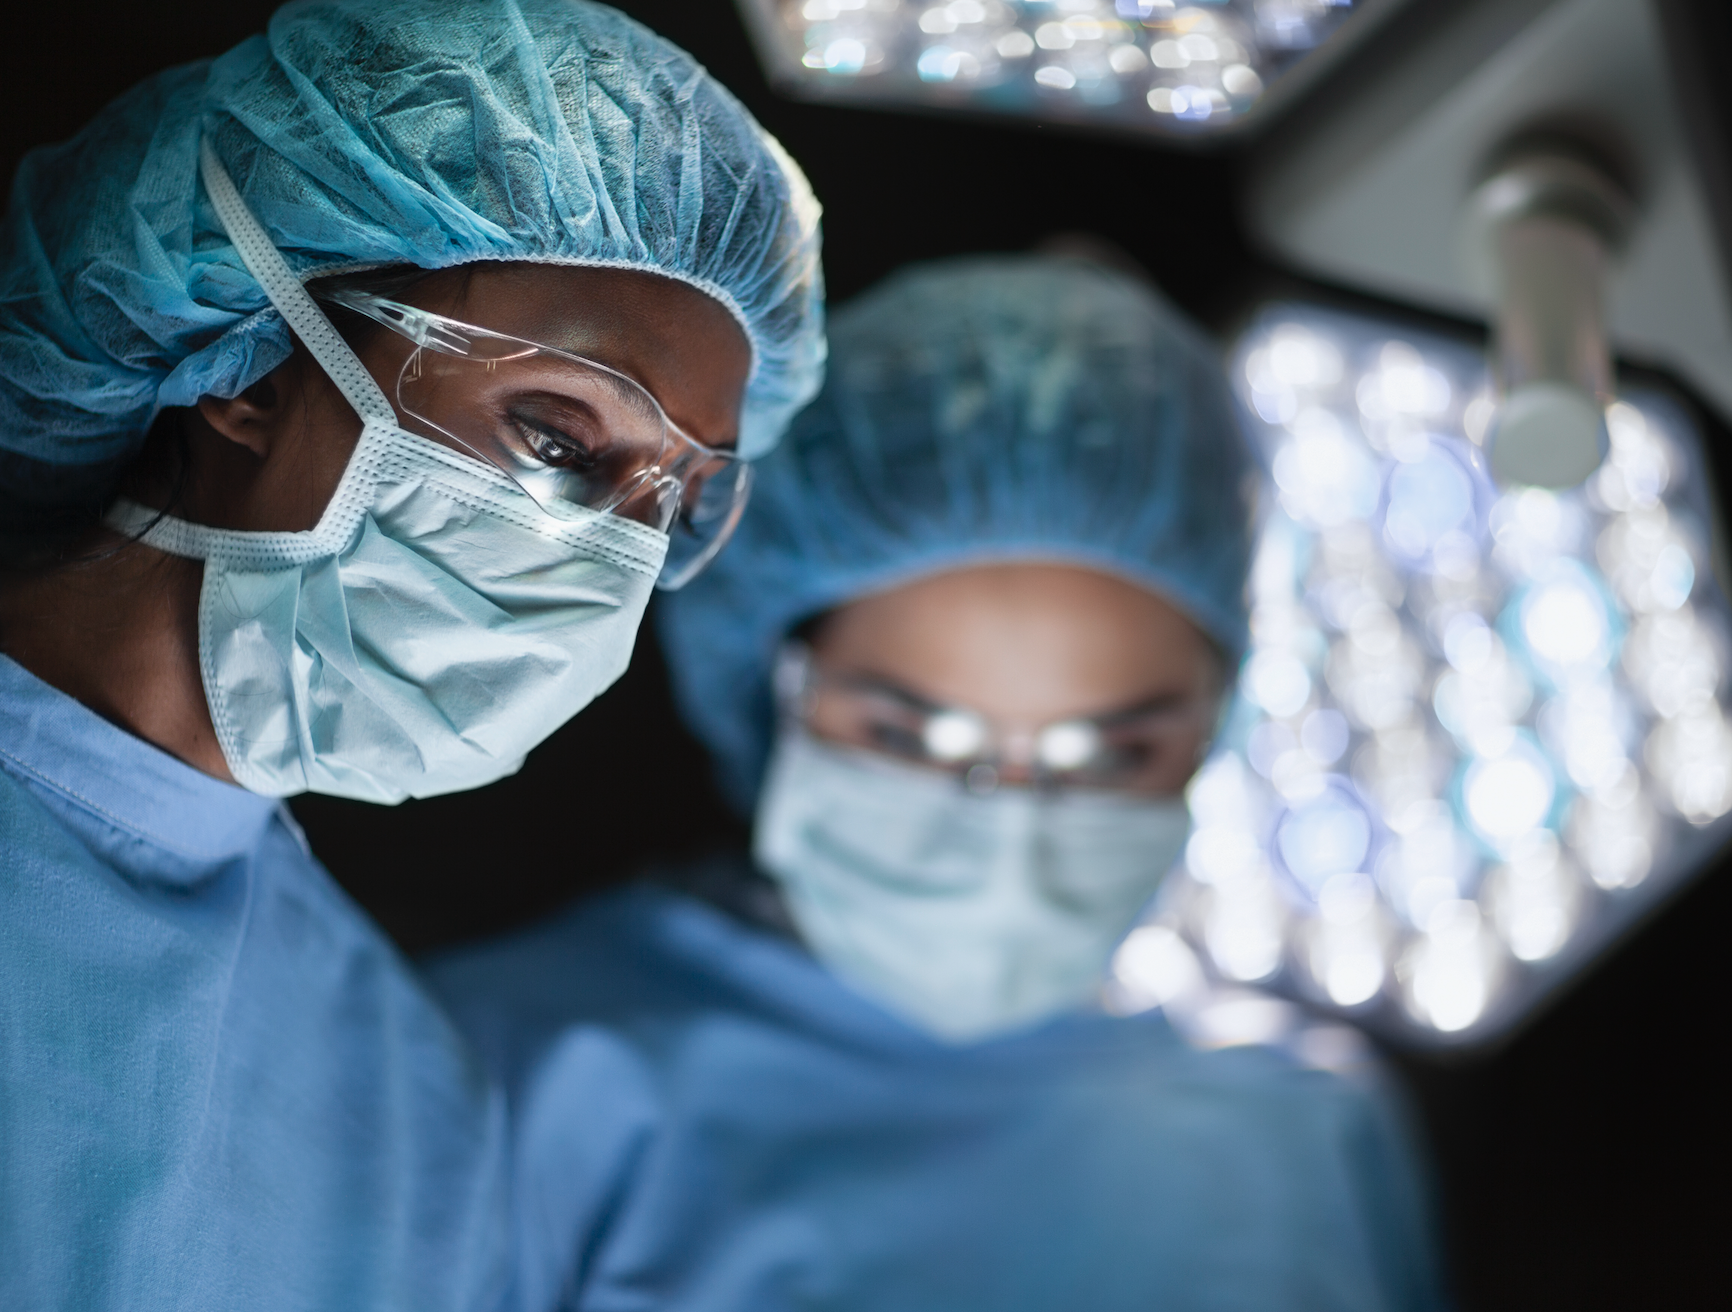 Two surgeons in scrubs and surgical masks focused on a procedure under bright operating lights